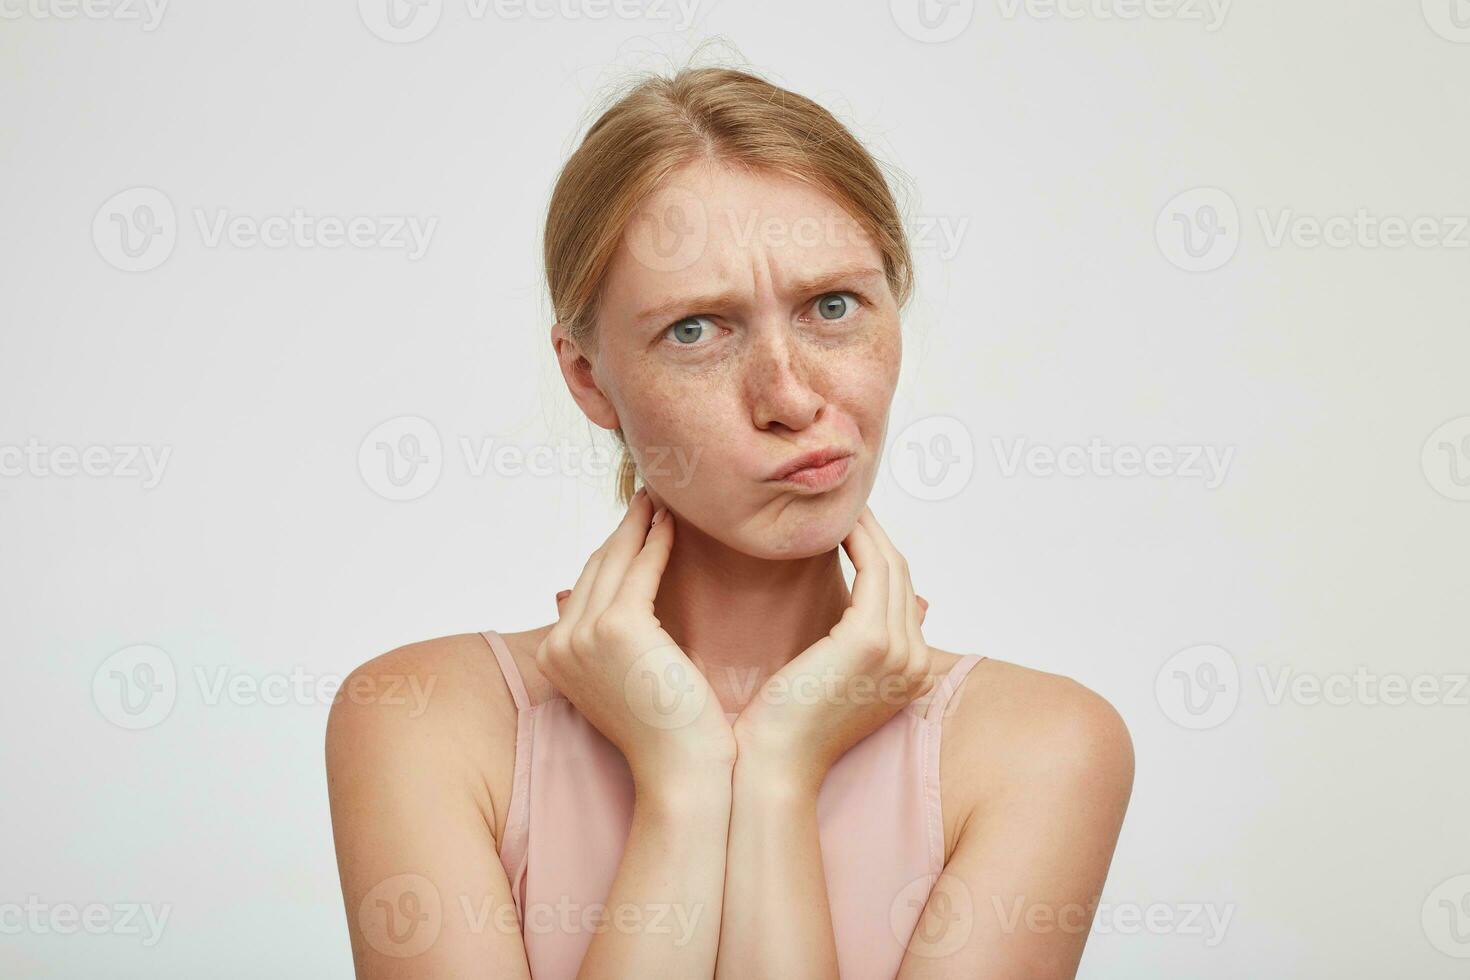 Puzzled young attractive redhead lady frowning her eyebrows and twisting mouth while looking confusedly at camera, keeping raised hands on neck while posing over white background photo